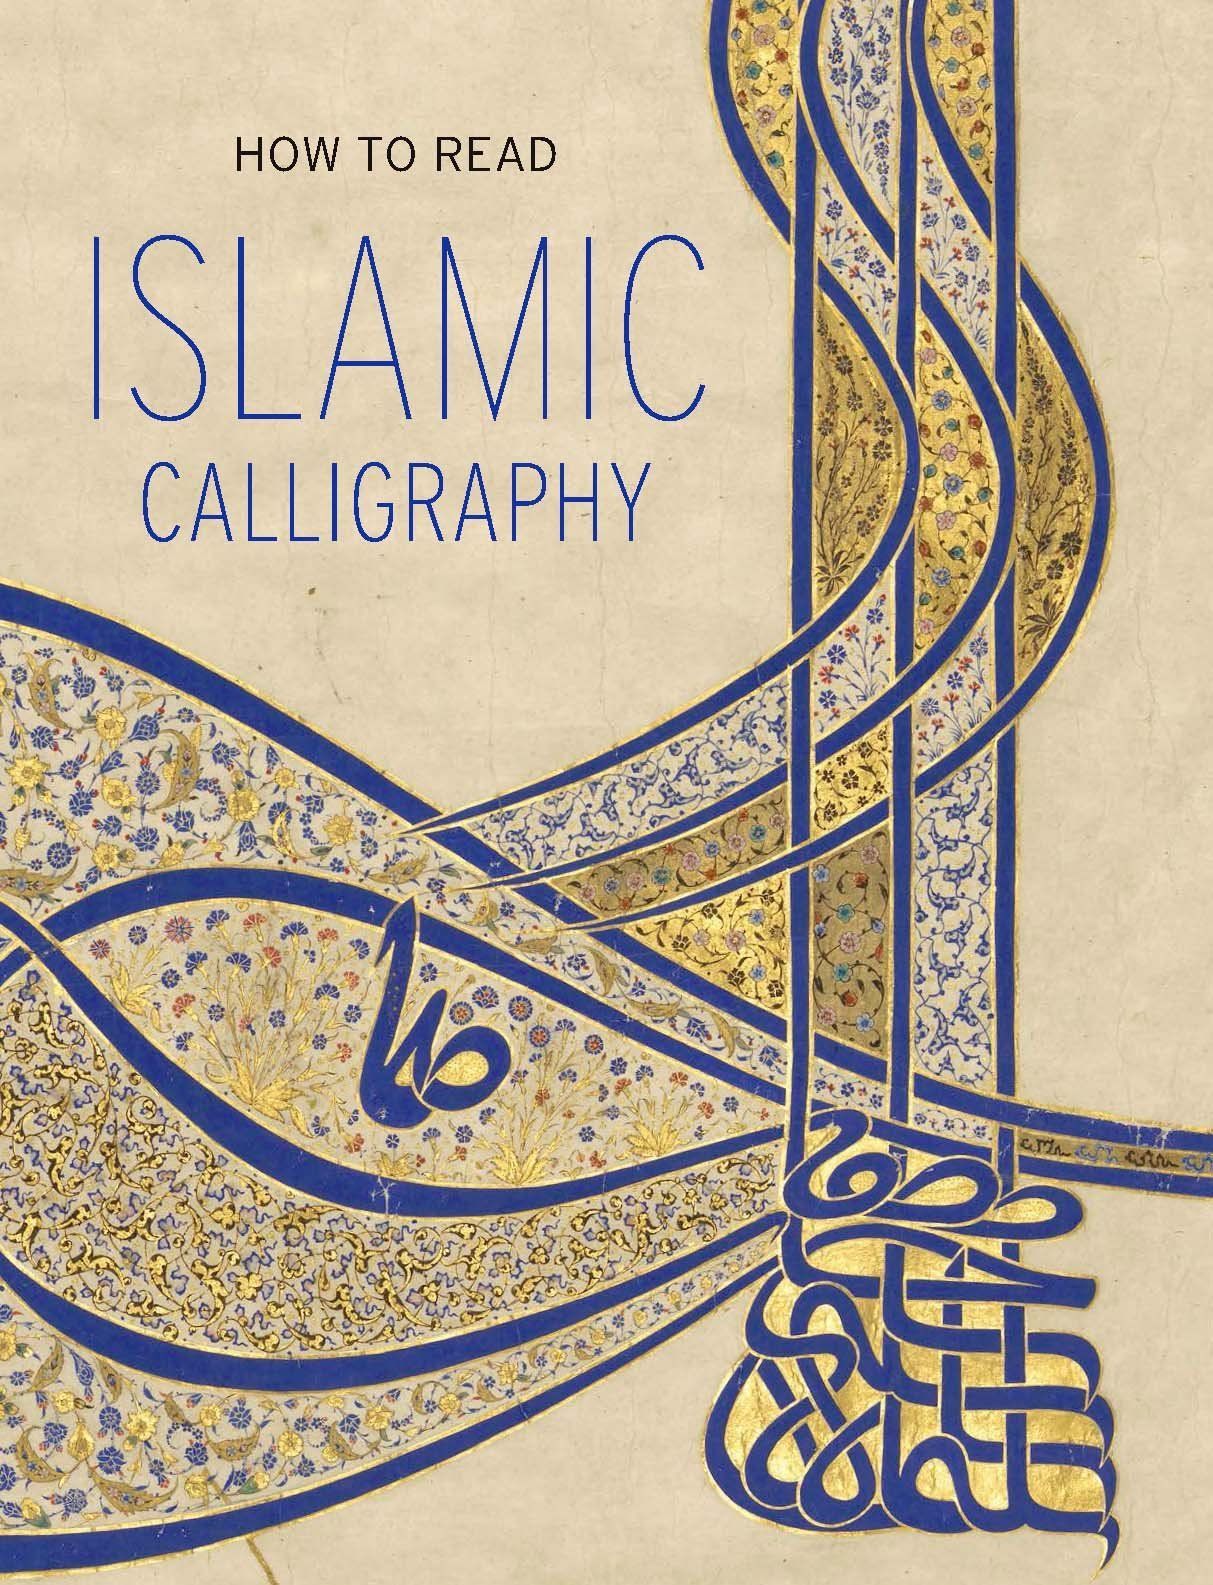 The Word as Image: On “How to Read Islamic Calligraphy”